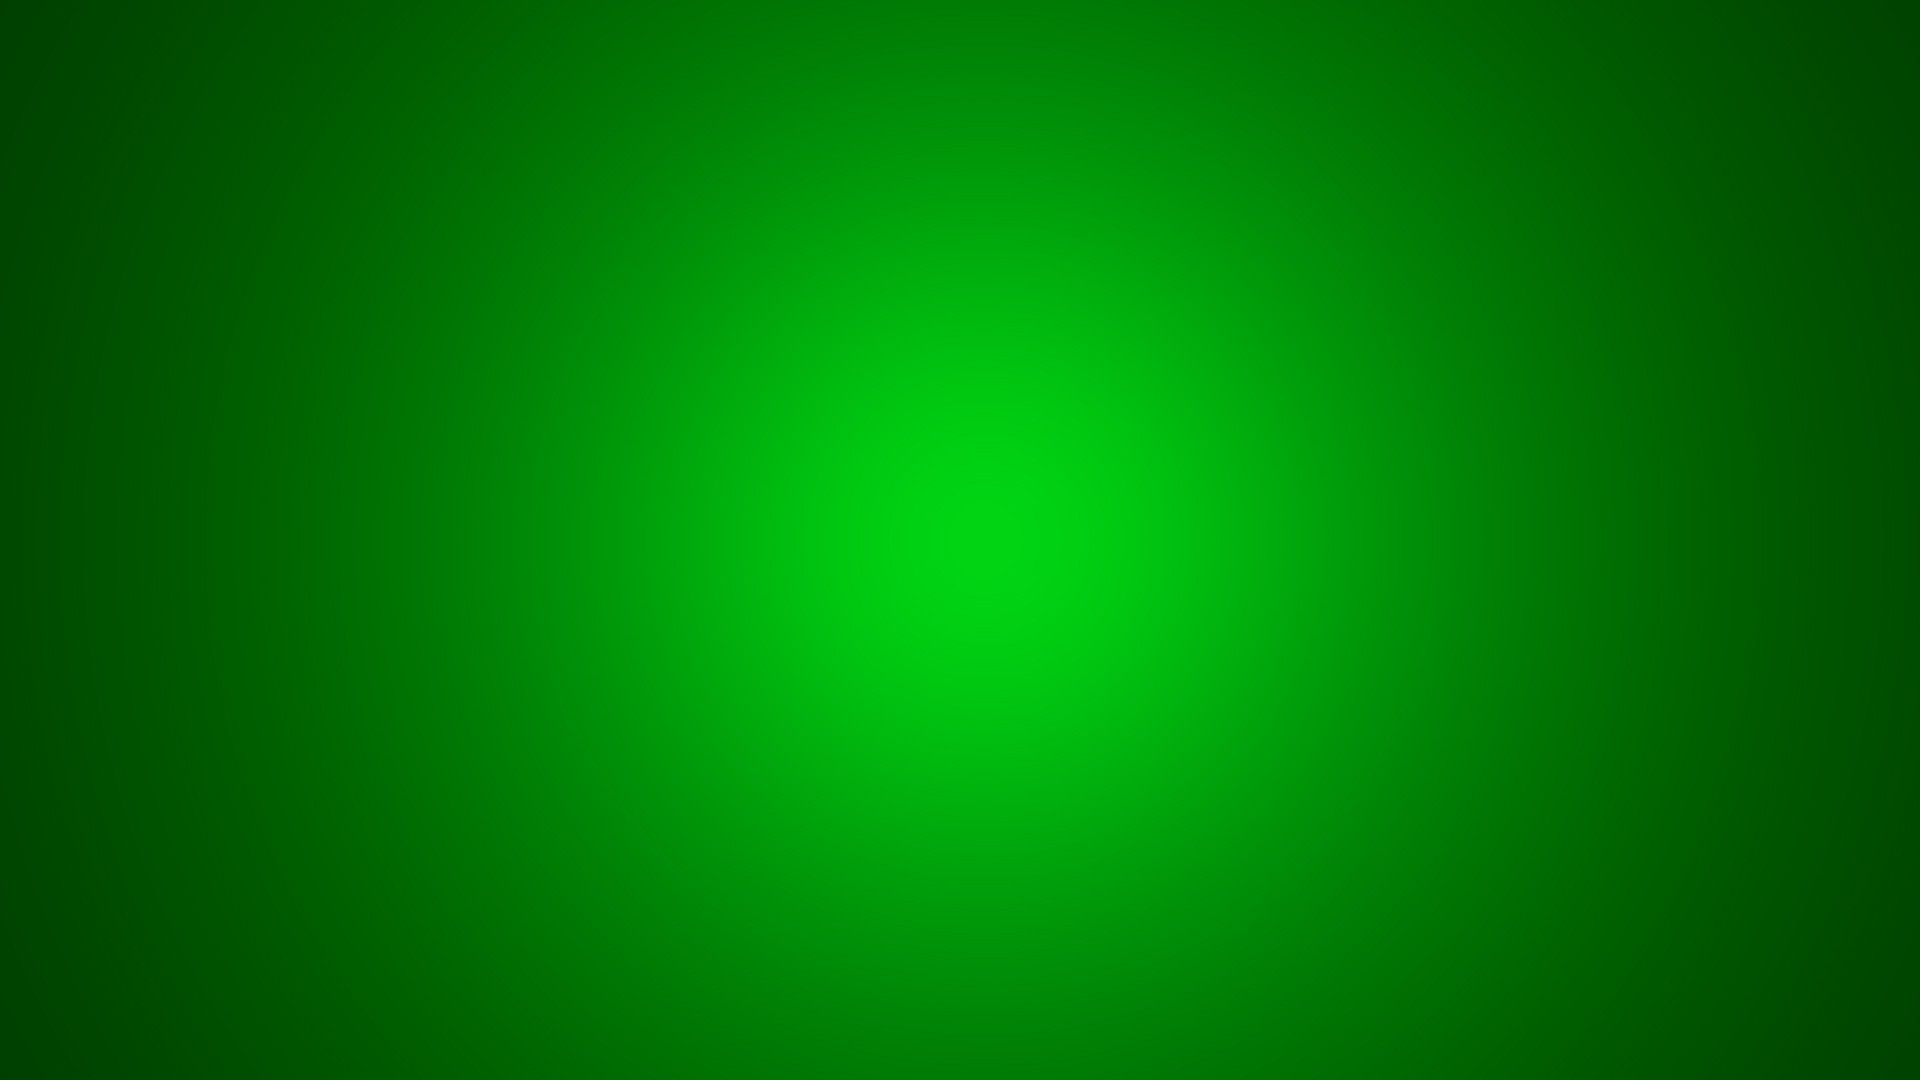 Plain Green Background HD Wallpaper, Background Images